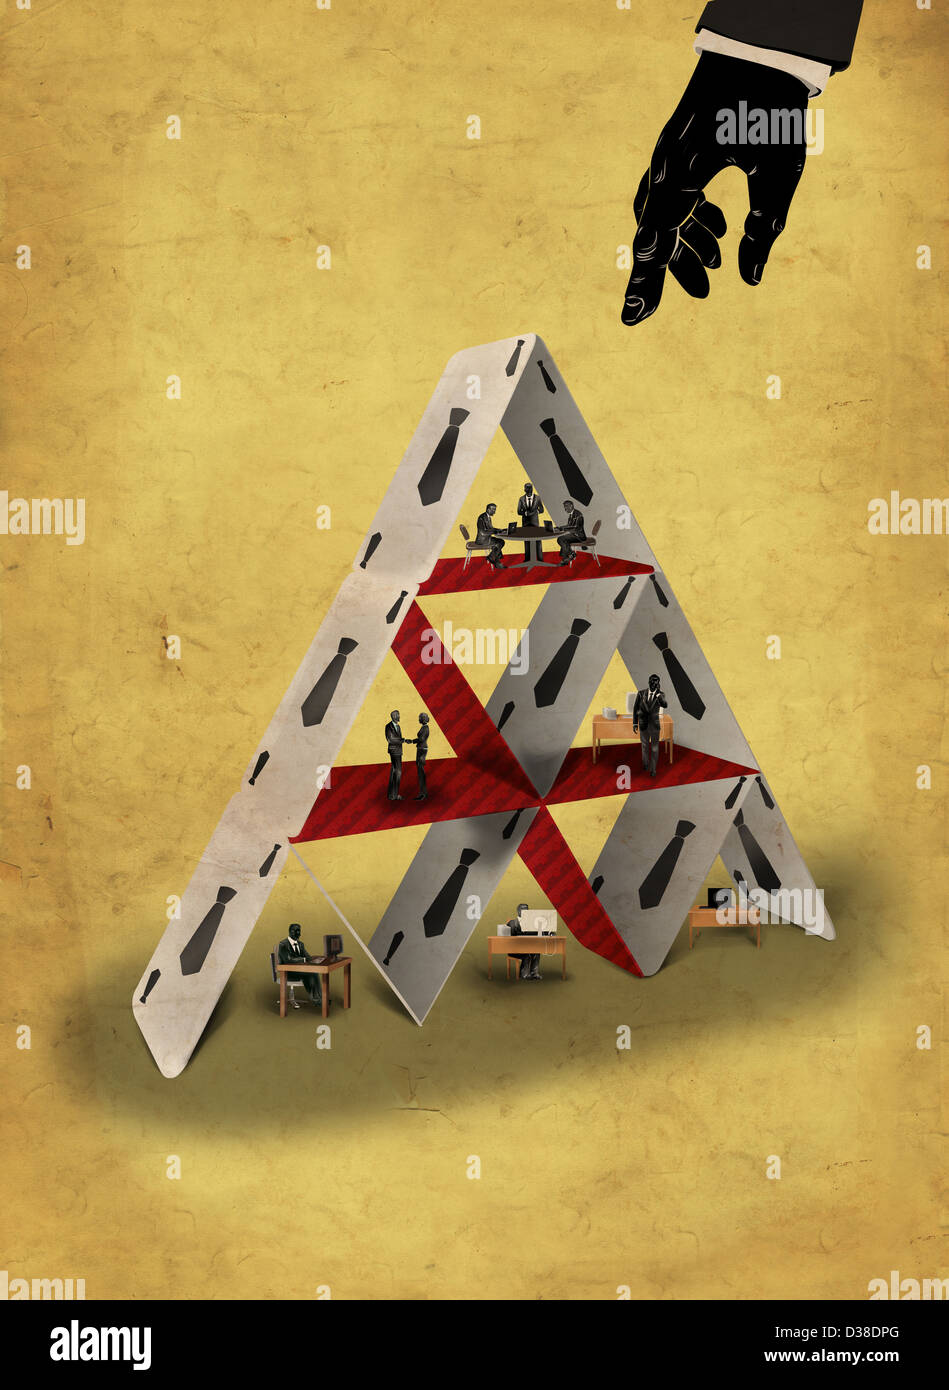 Illustrative image of hand pointing towards pyramid made of cards representing teamwork Stock Photo